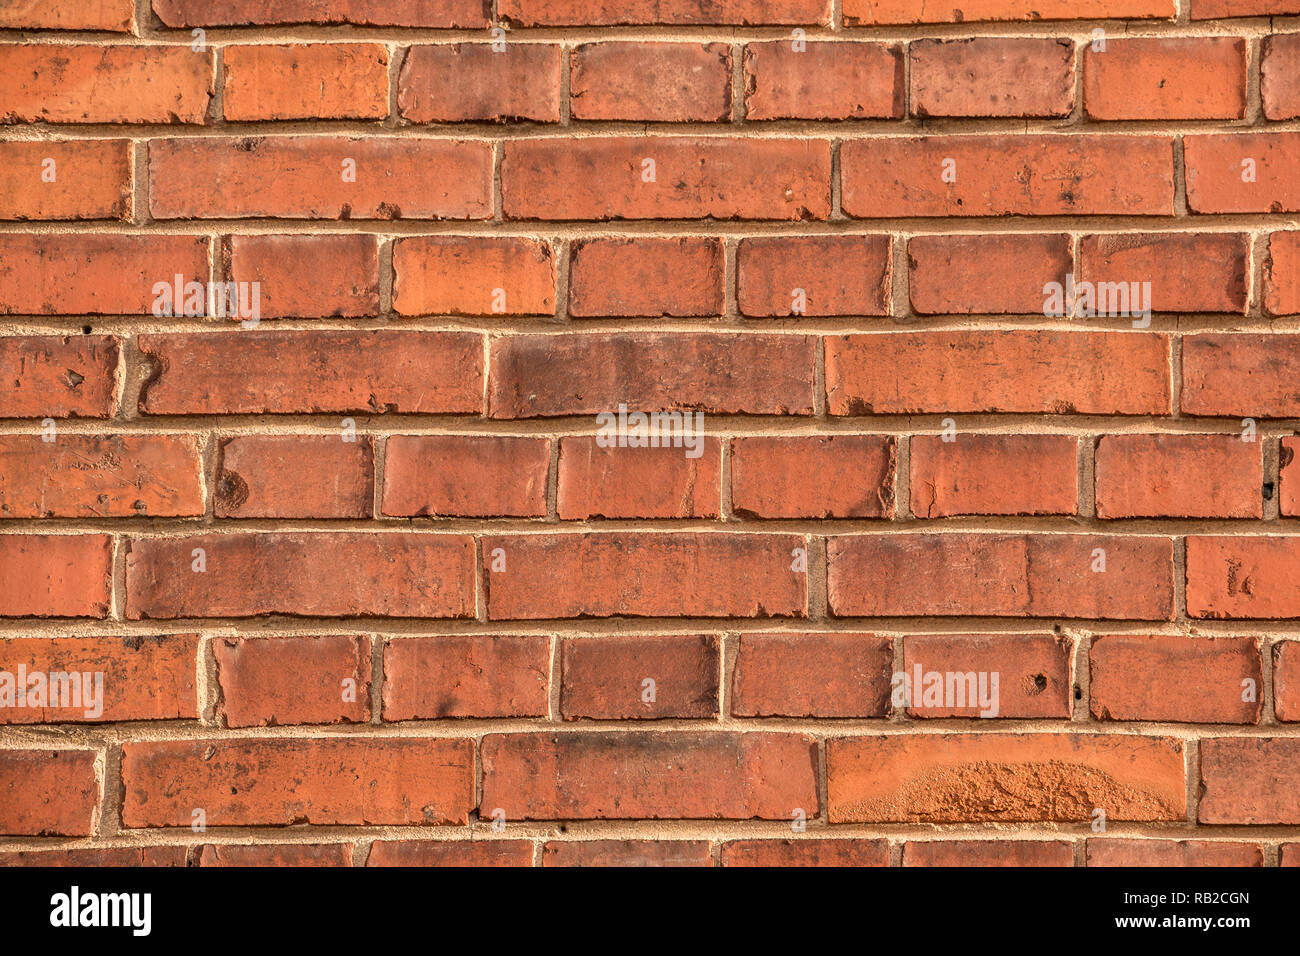 Old empty brick house factory wall with red bricks Stock Photo